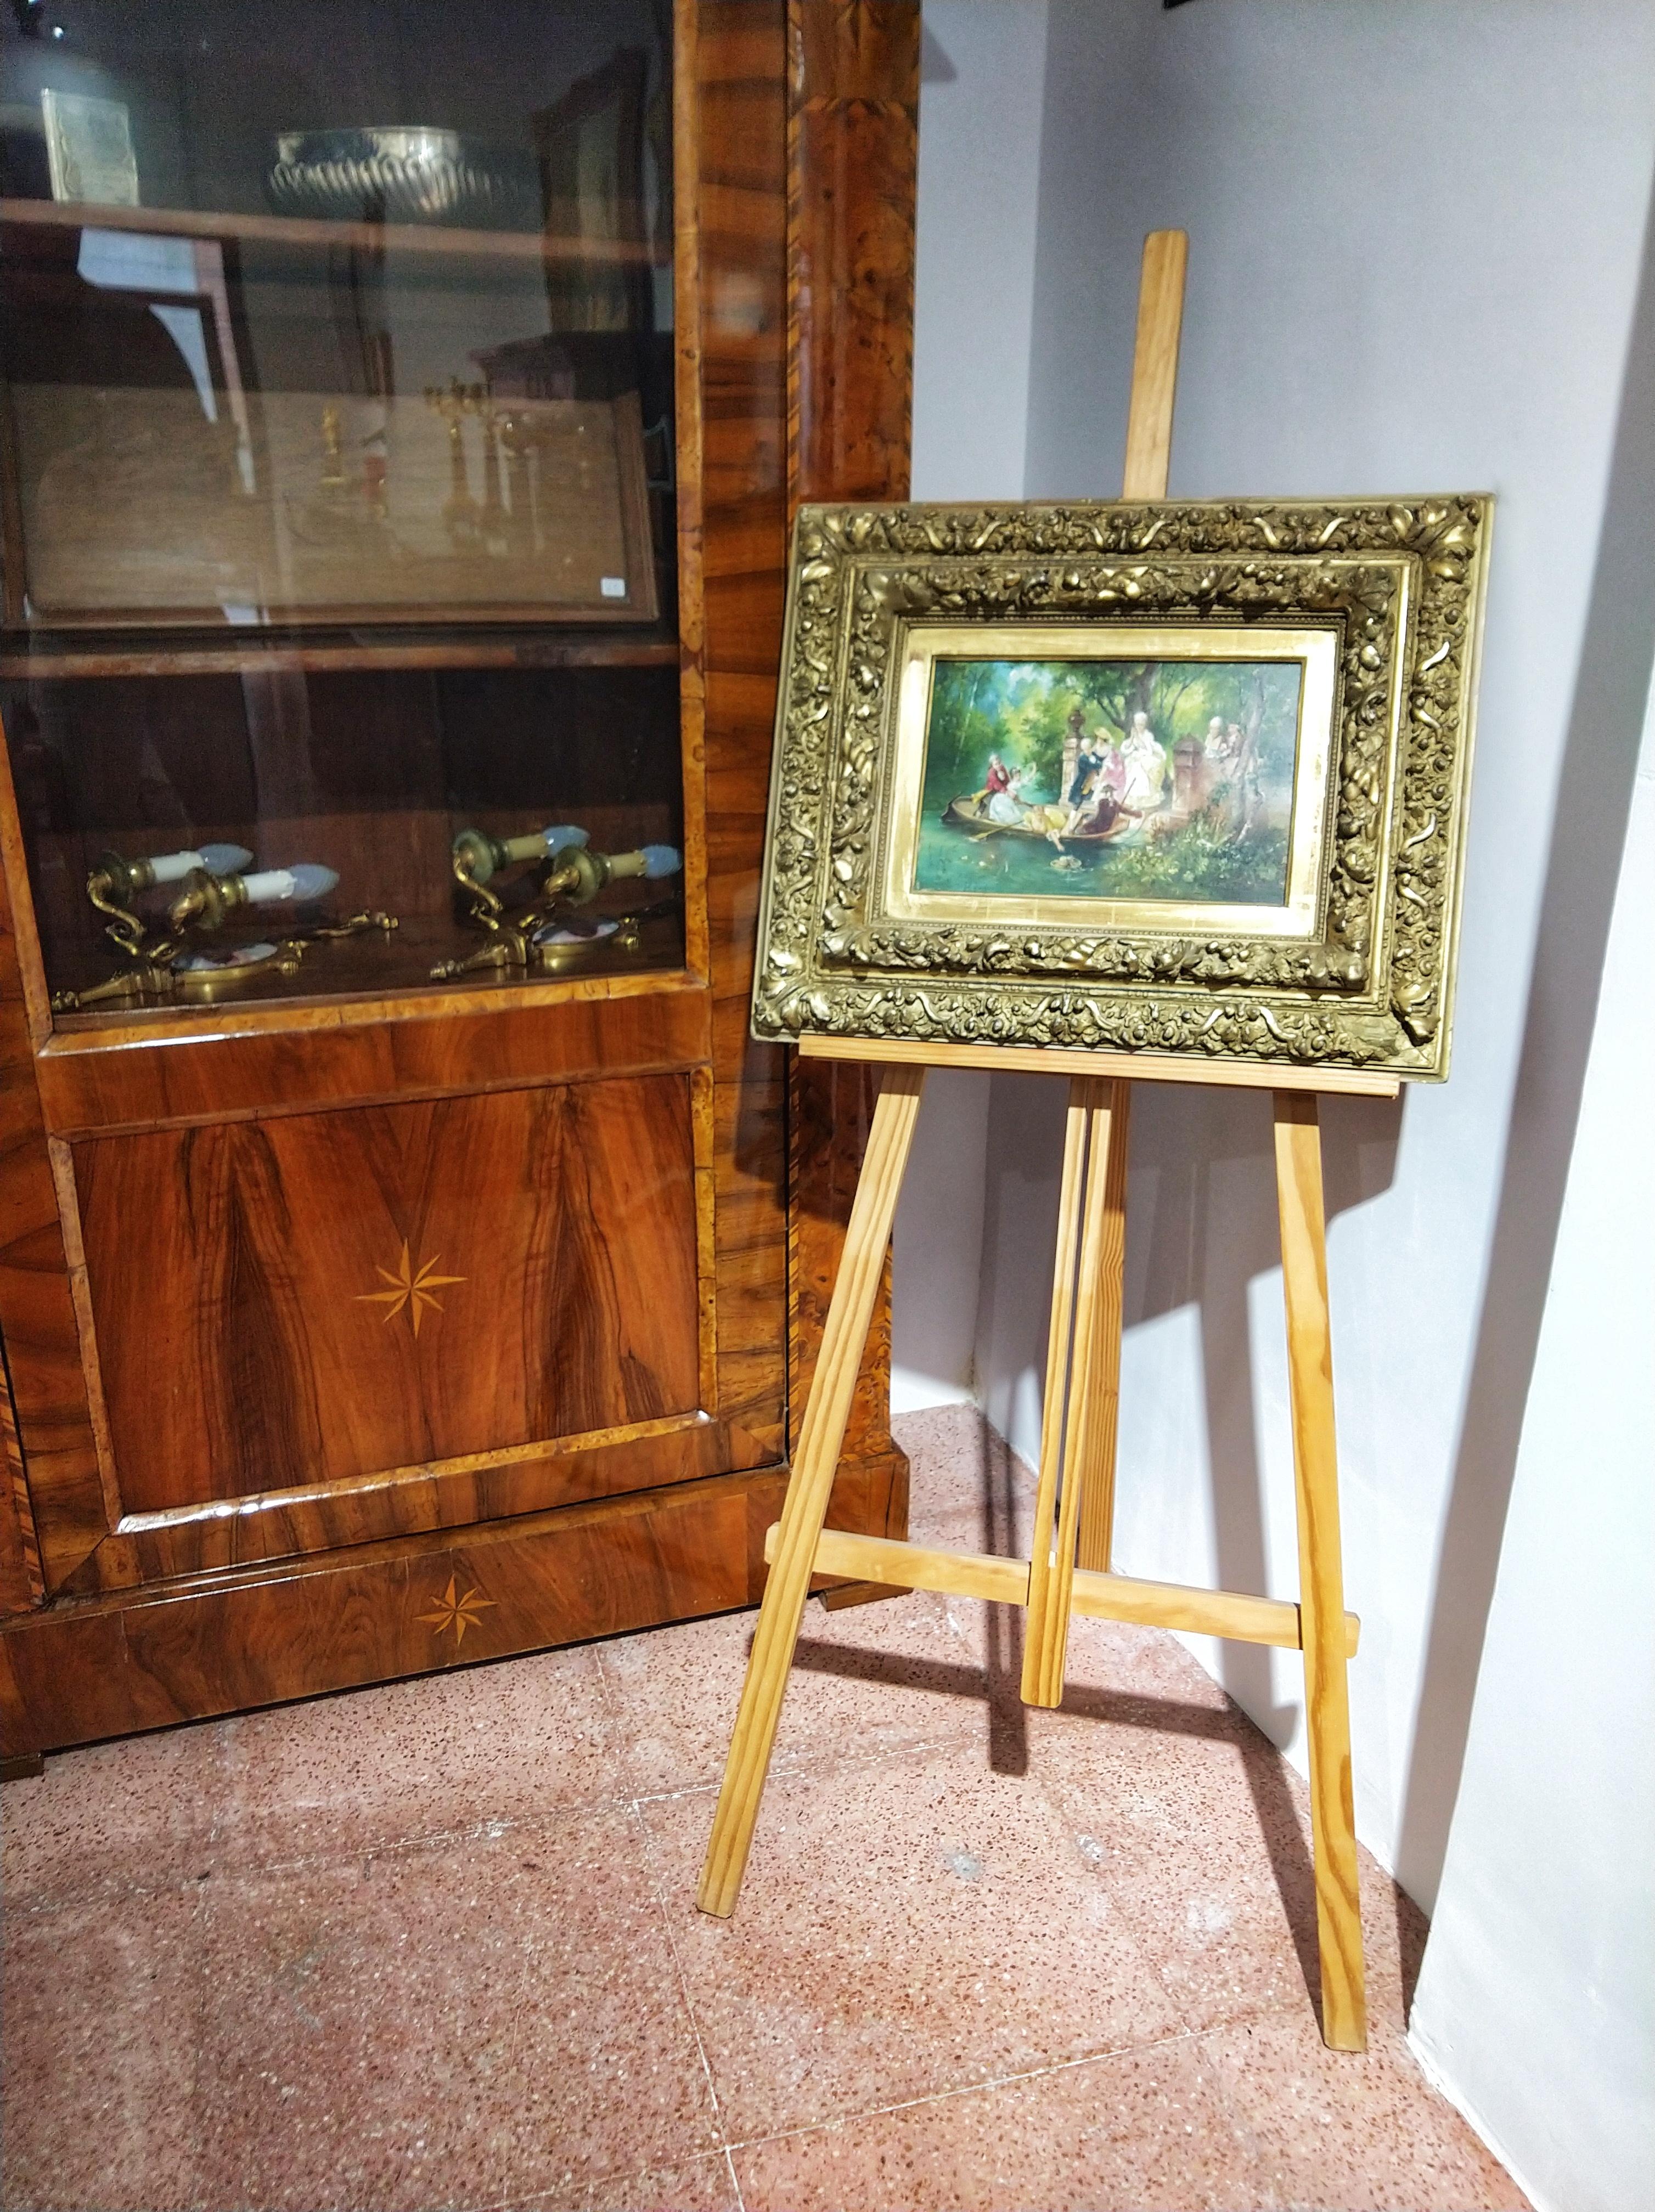 19th century Italian school oil painting on wood, small lake of Villa Borghese scene in Rome, signed an with beautiful coeval frame.